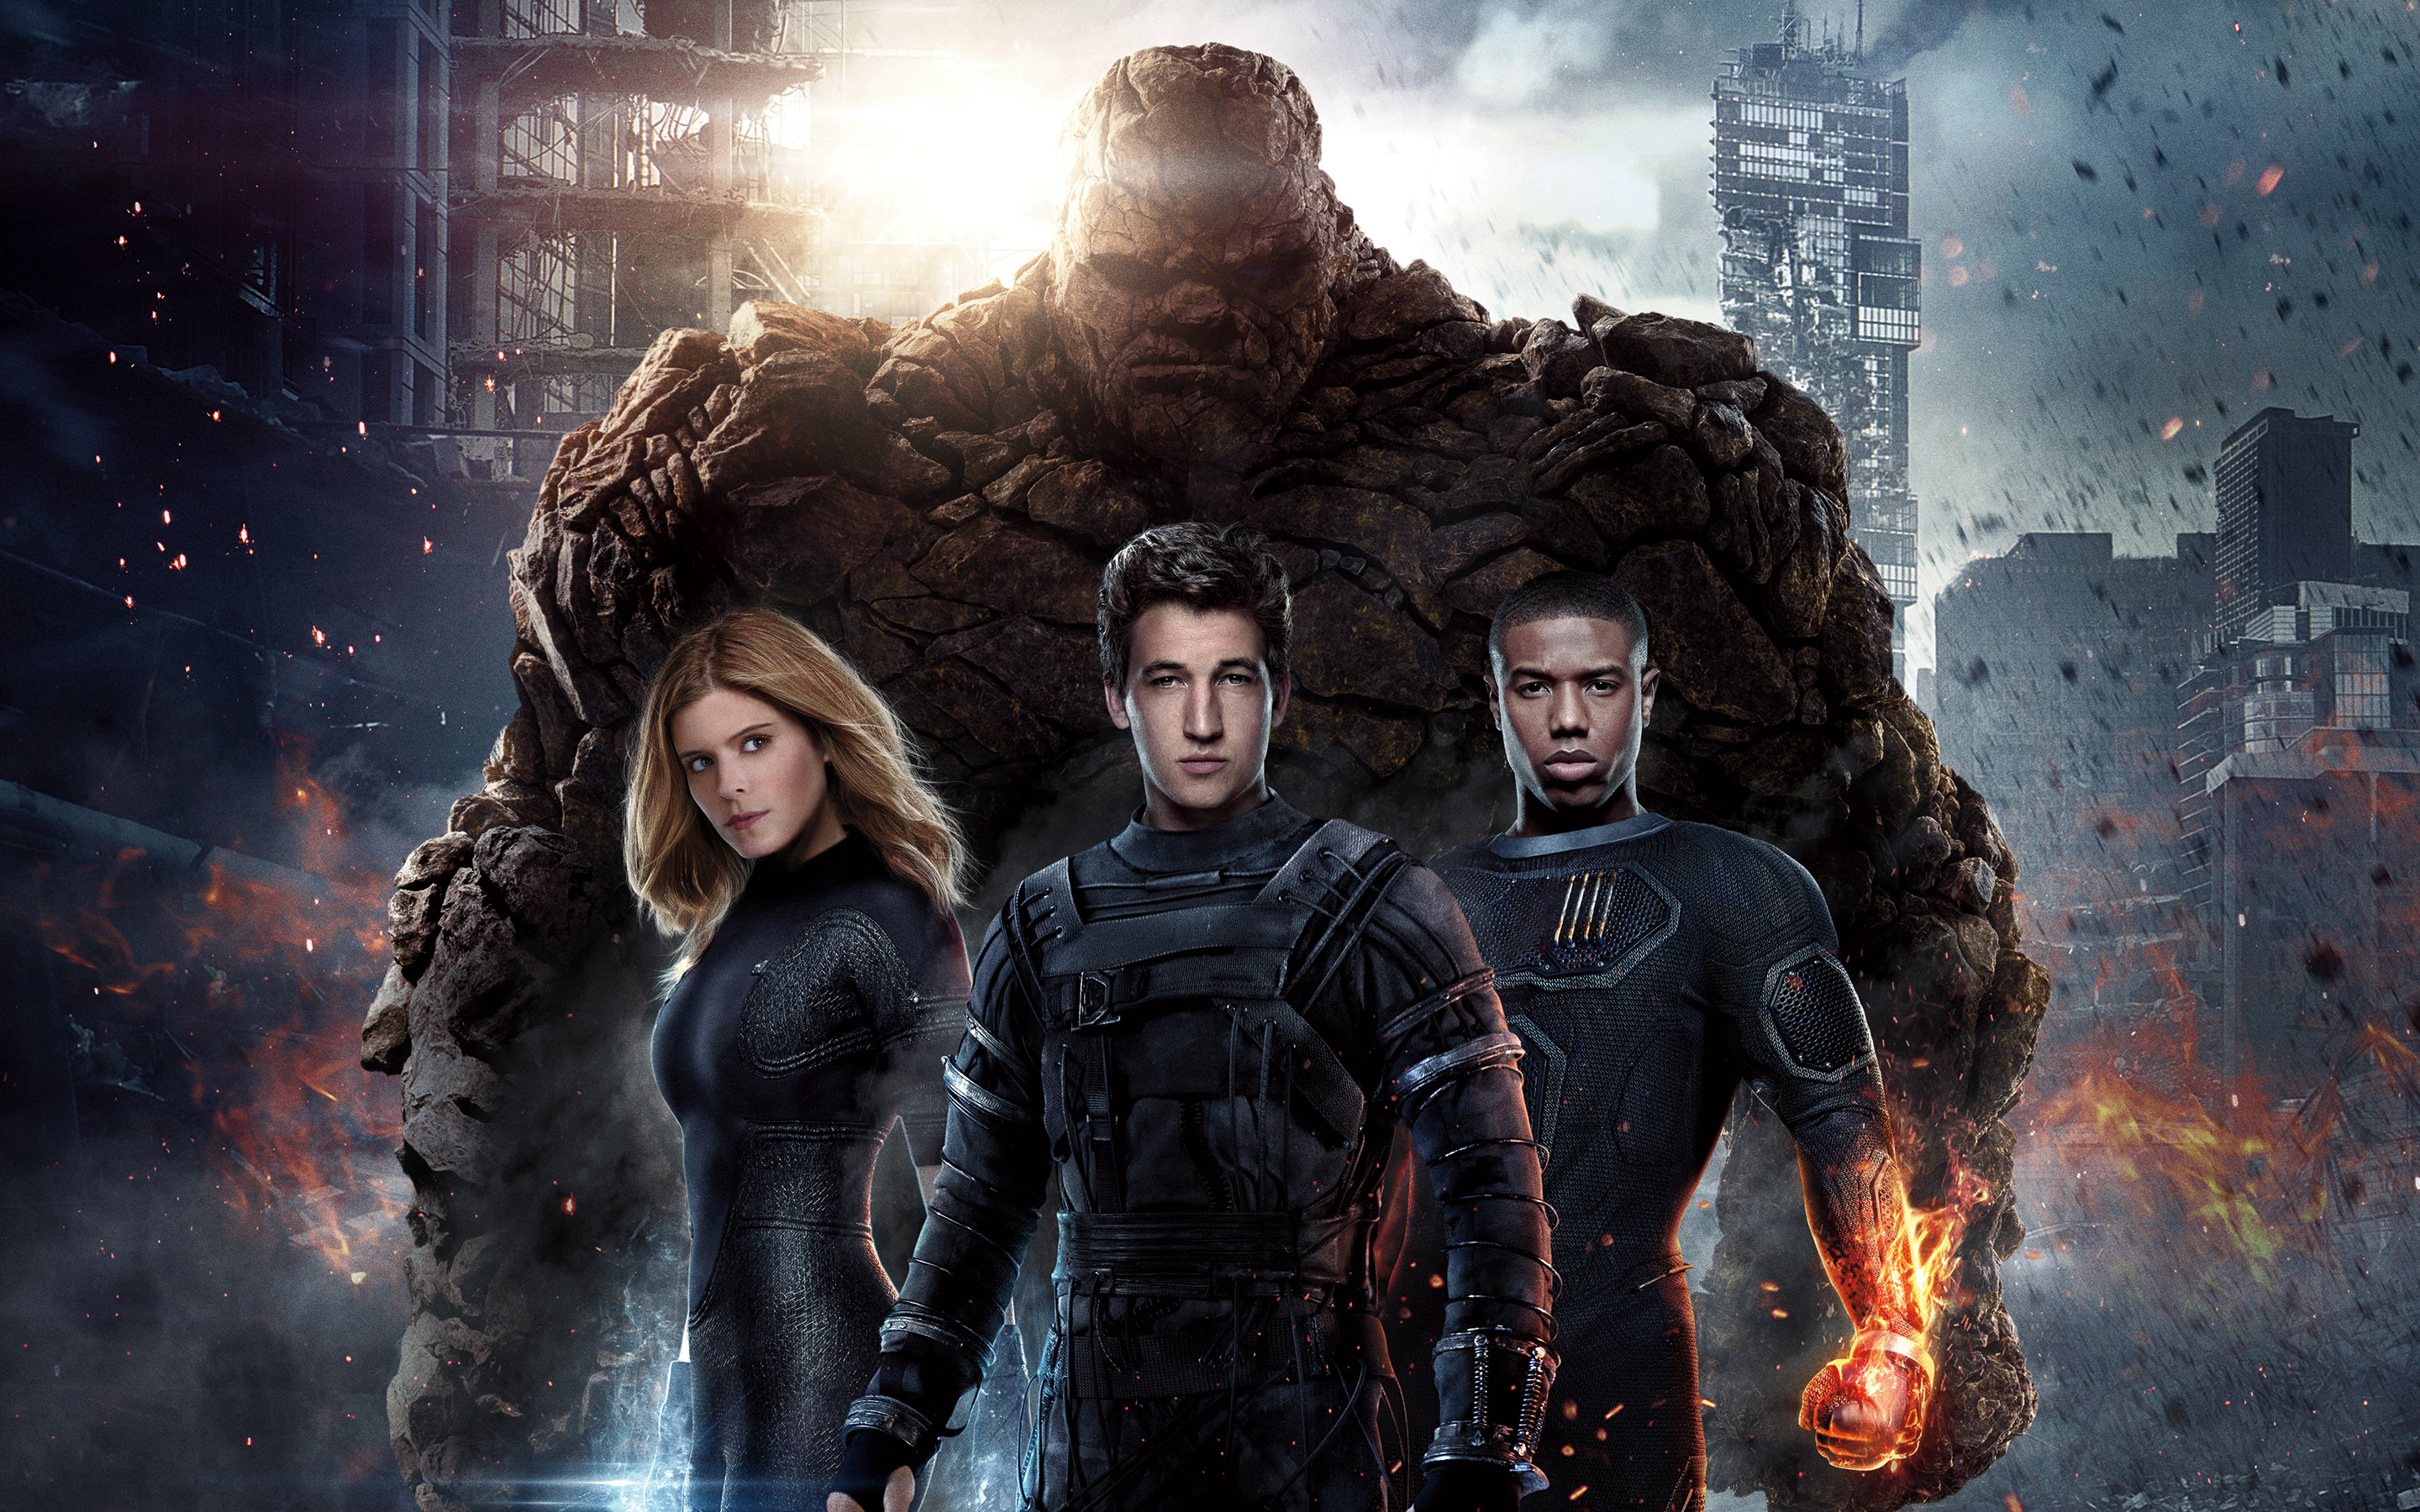 Fantastic Four (2015) Wallpapers